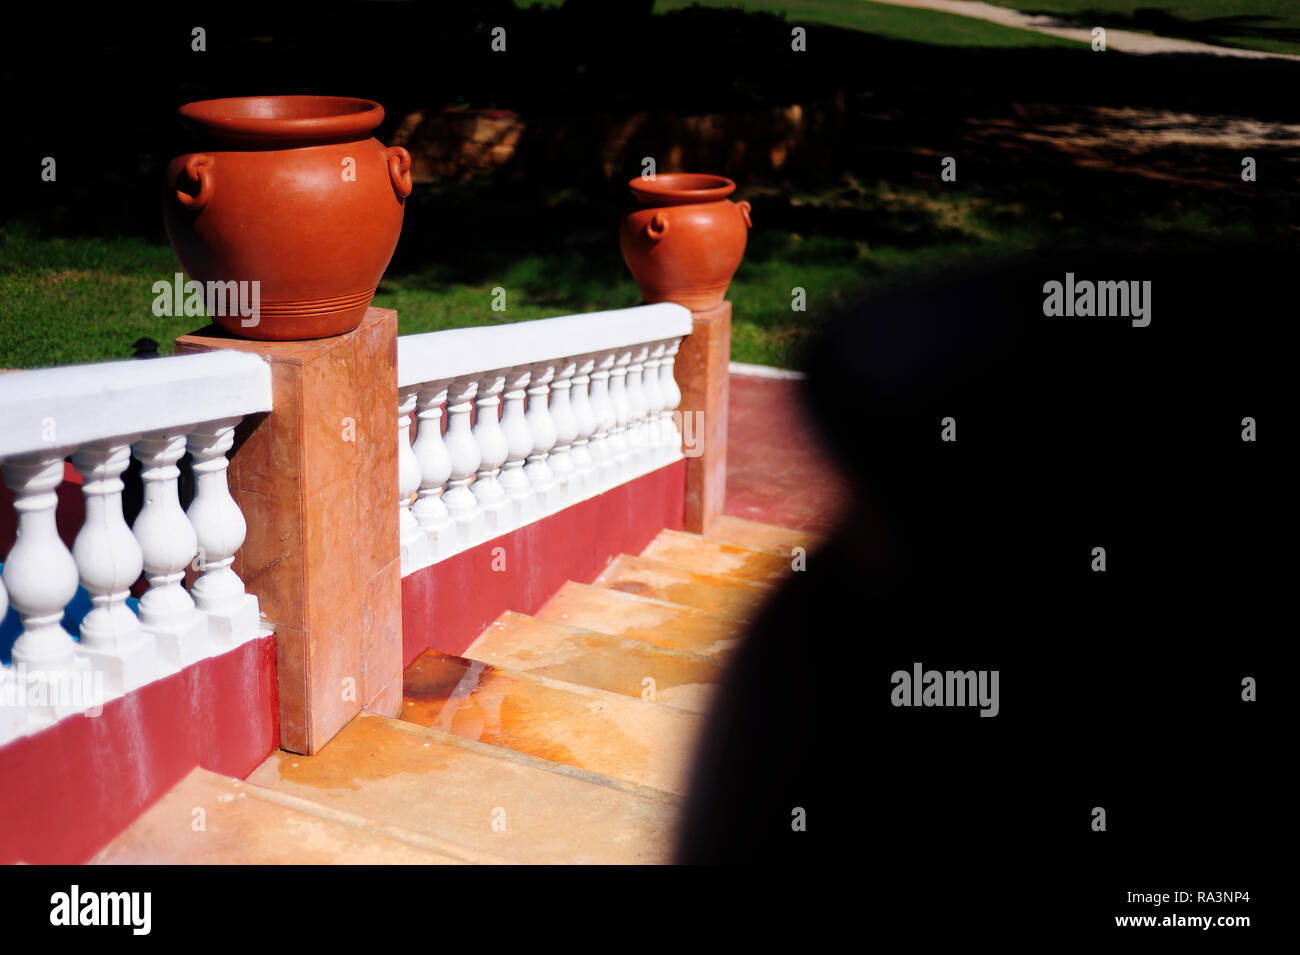 MERIDA, YUC/MEXICO - NOV 13, 2017: Architectural detail of unfilled plantpots and stairs at San Pedro Palomeque estate Stock Photo